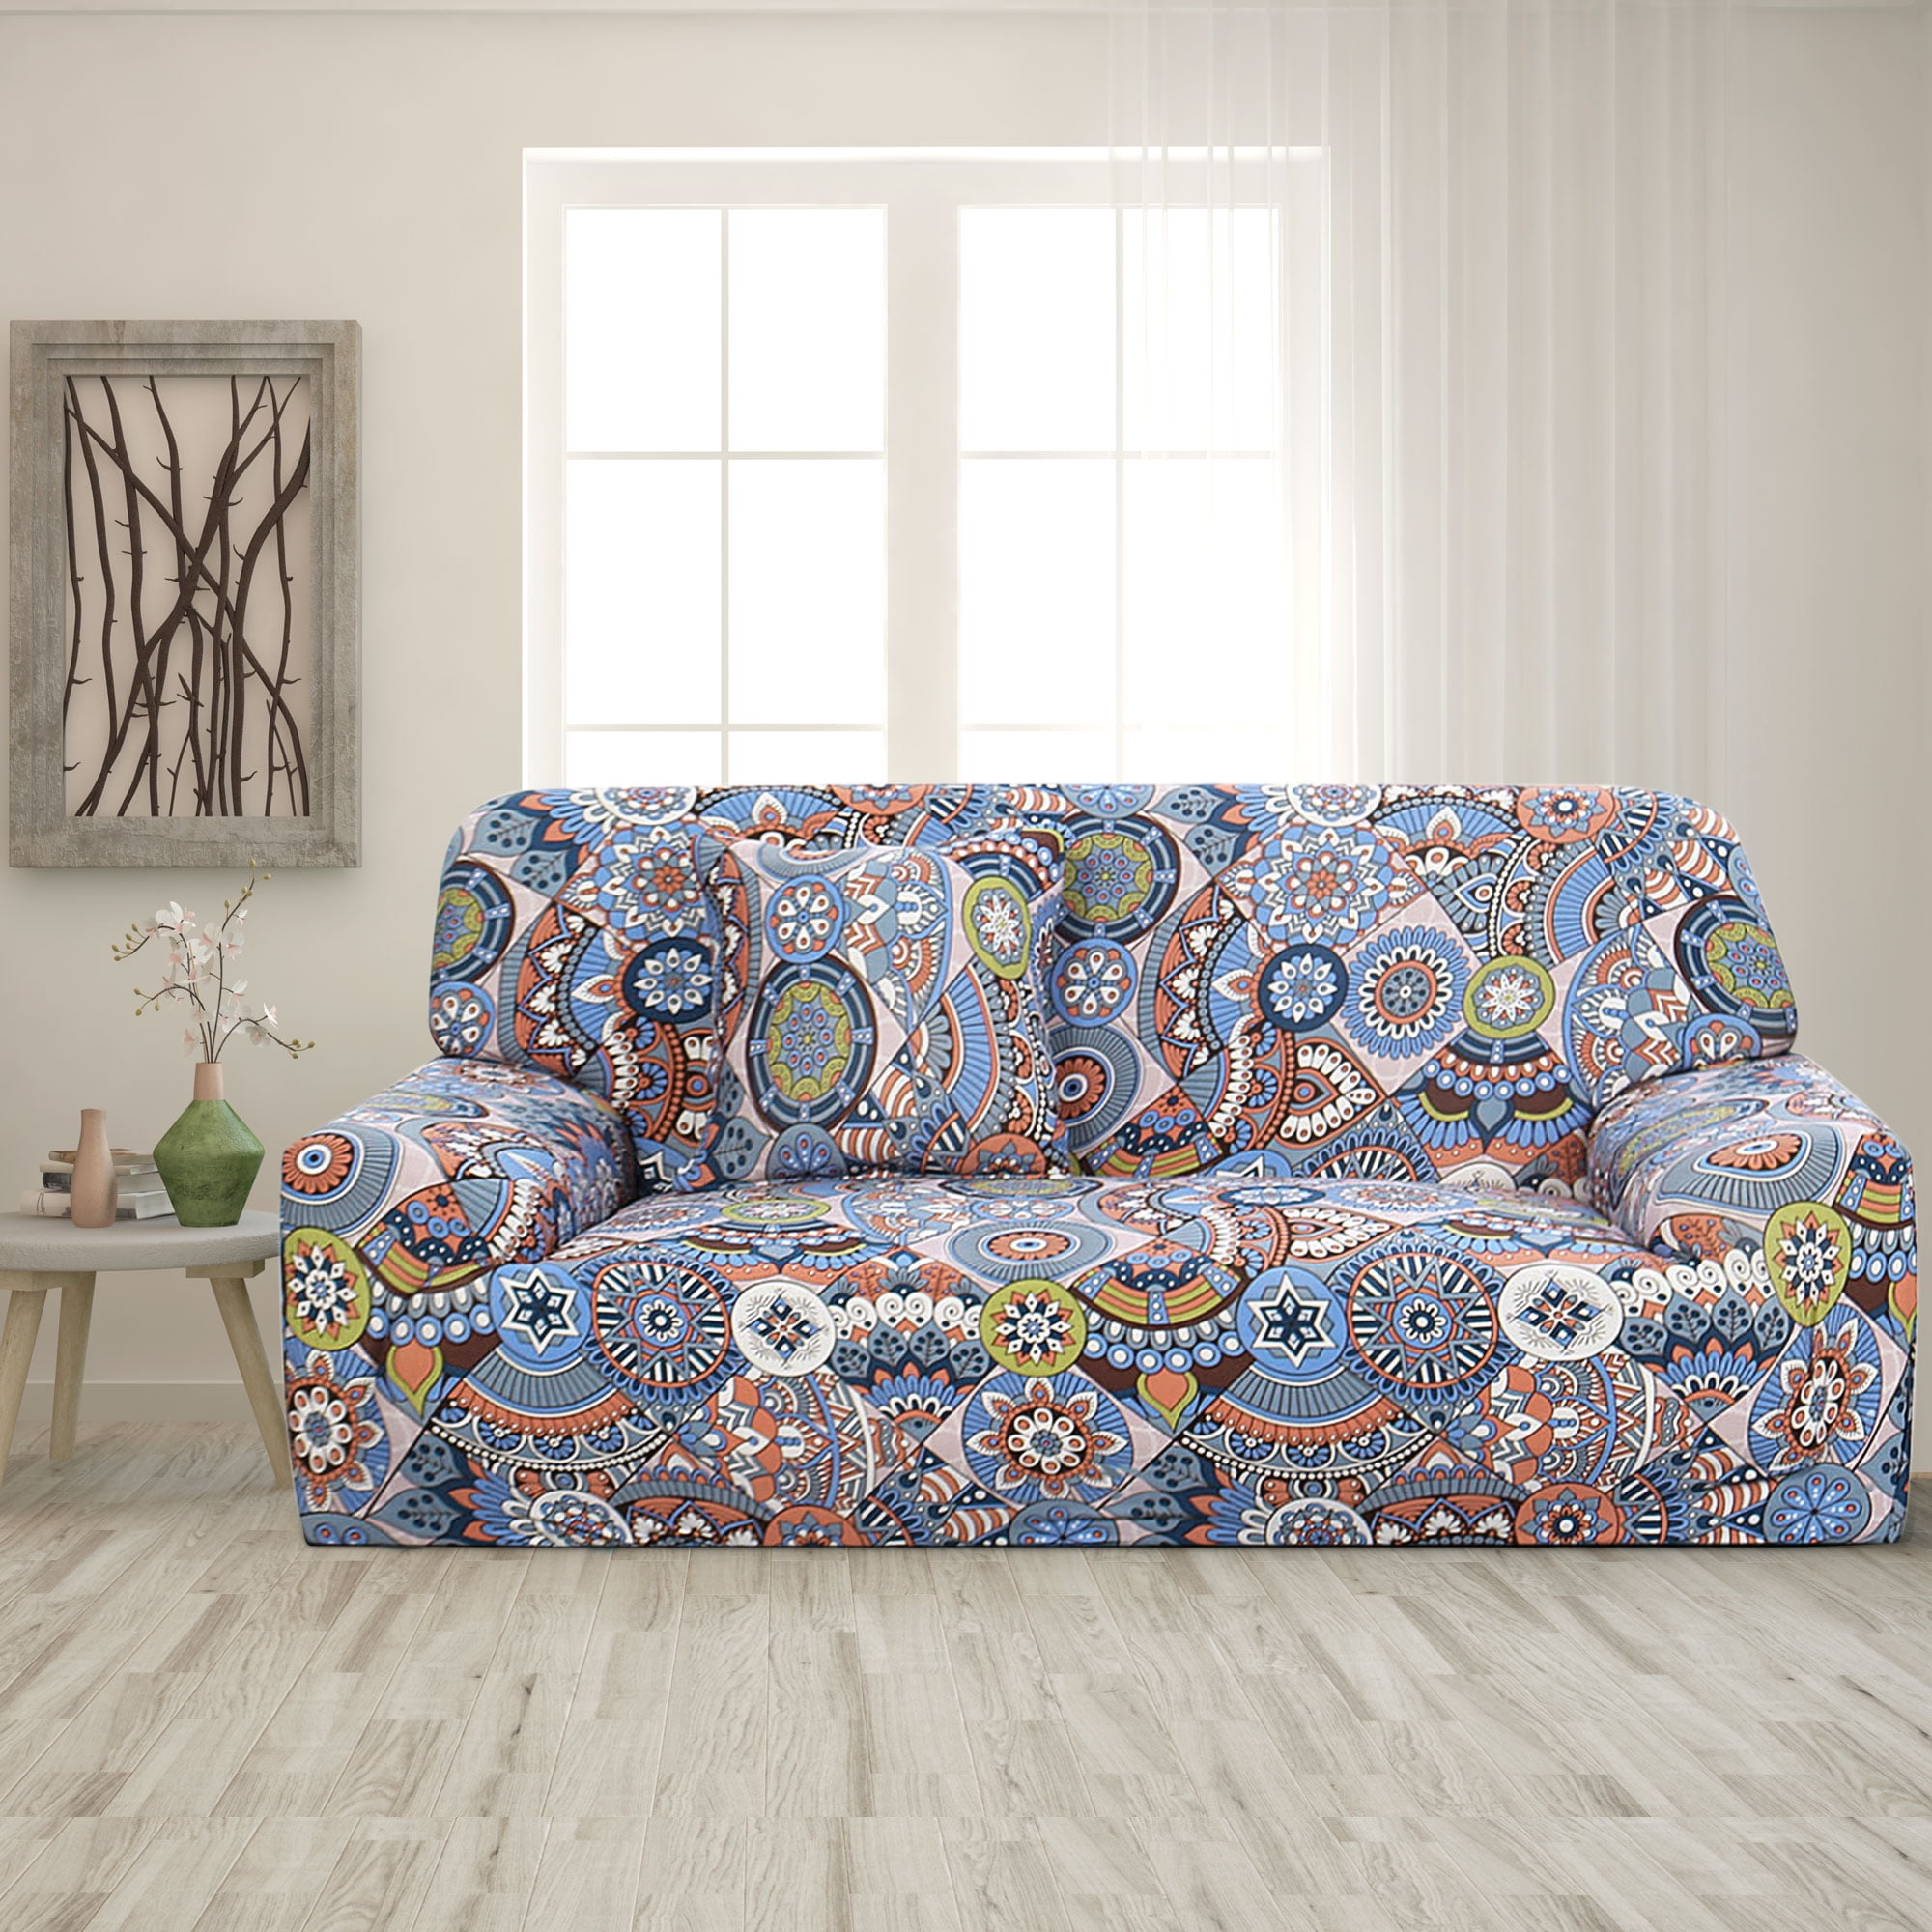 Details about   1 2 3Seater Printed Slipcover Sofa Cover Spandex Stretch Elastic Couch 